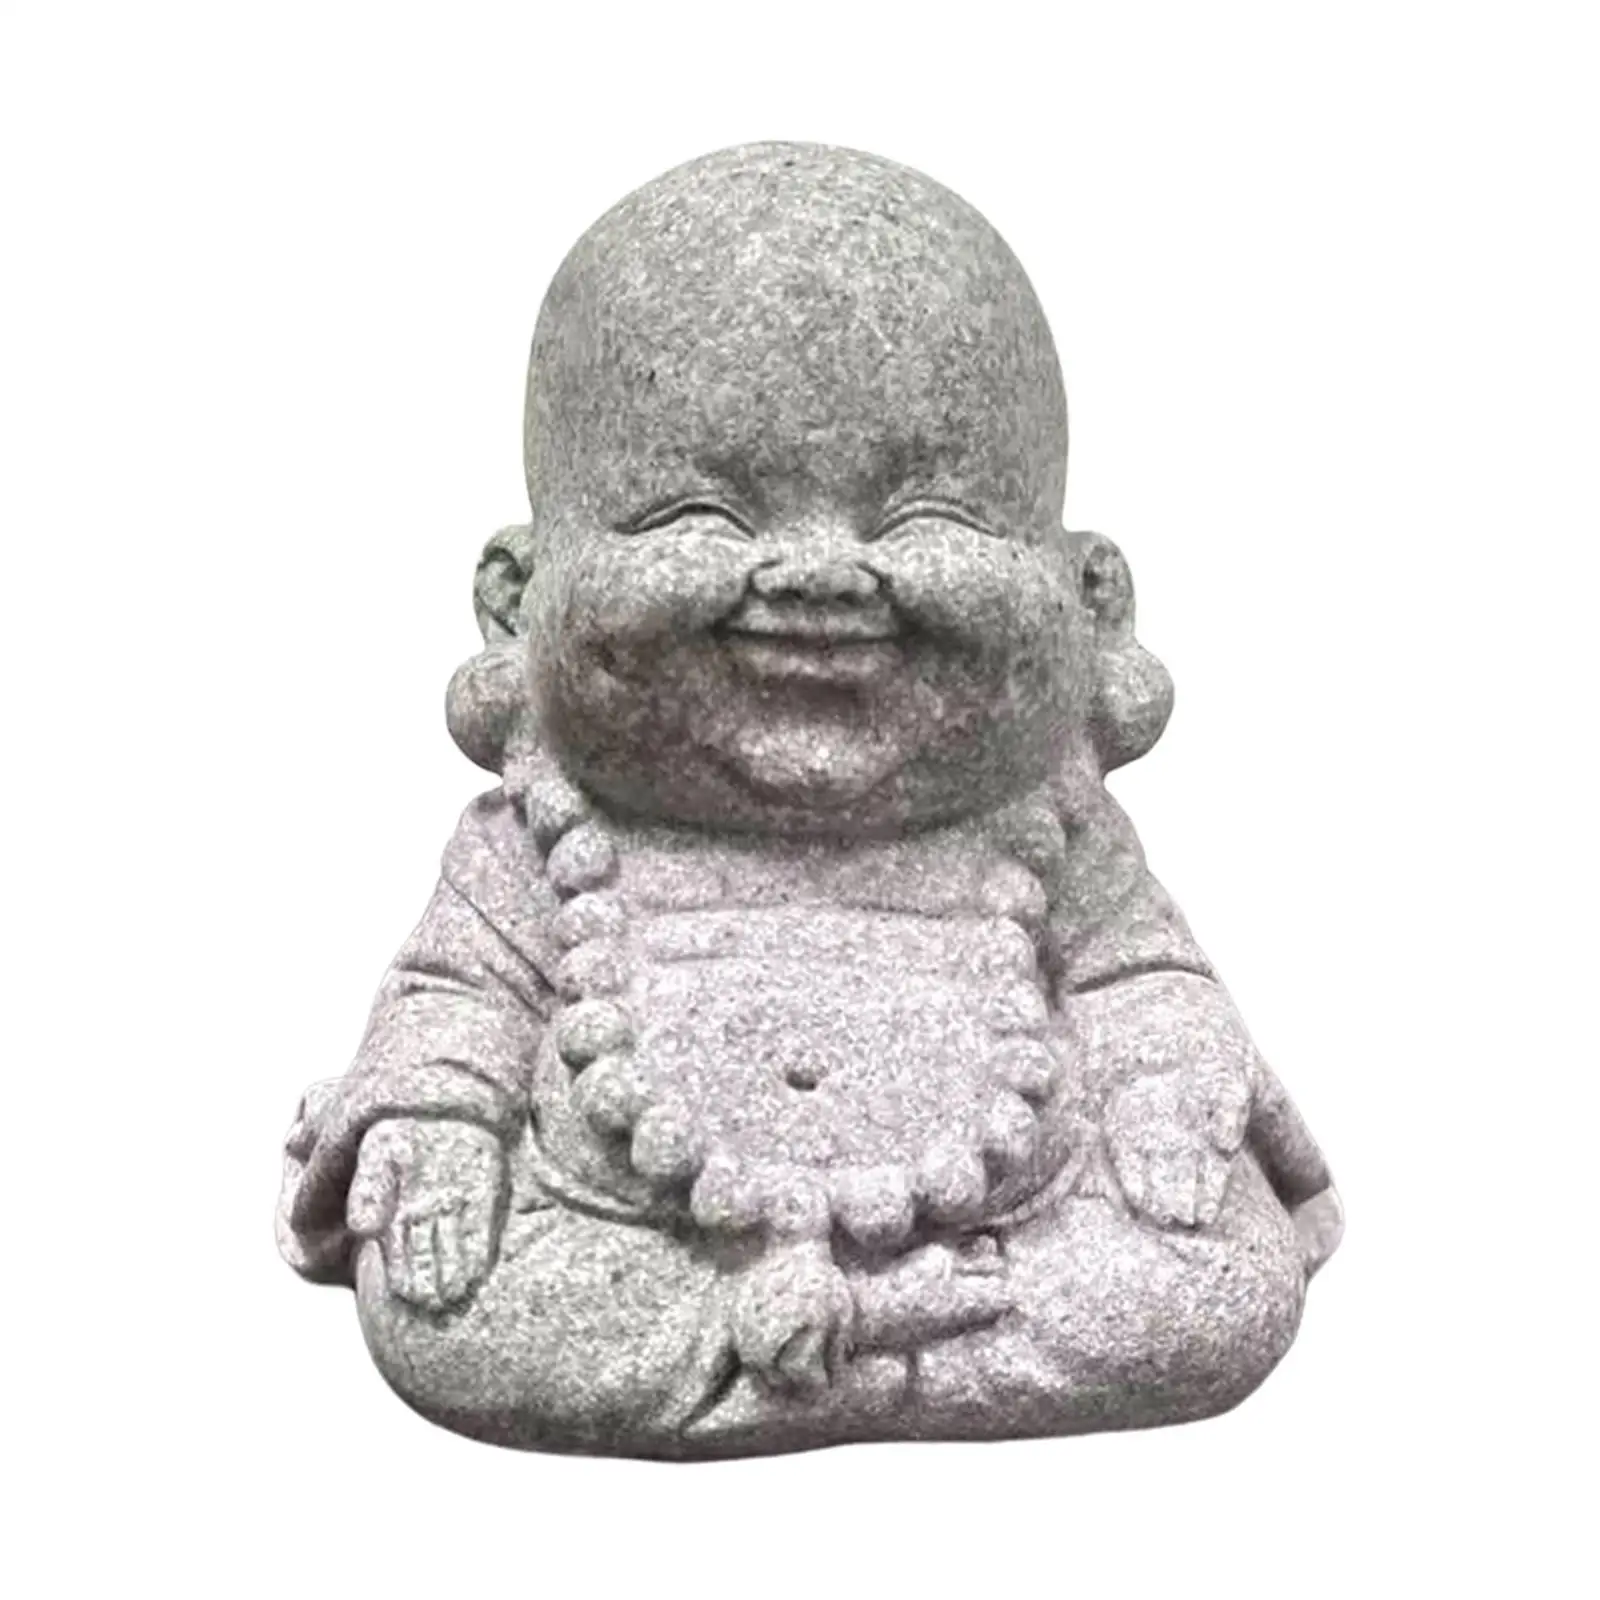 Buddha Statue Handcrafted Meditating Figurines Miniature Antique Tea Pet Ornament for Home Tabletop Decoration